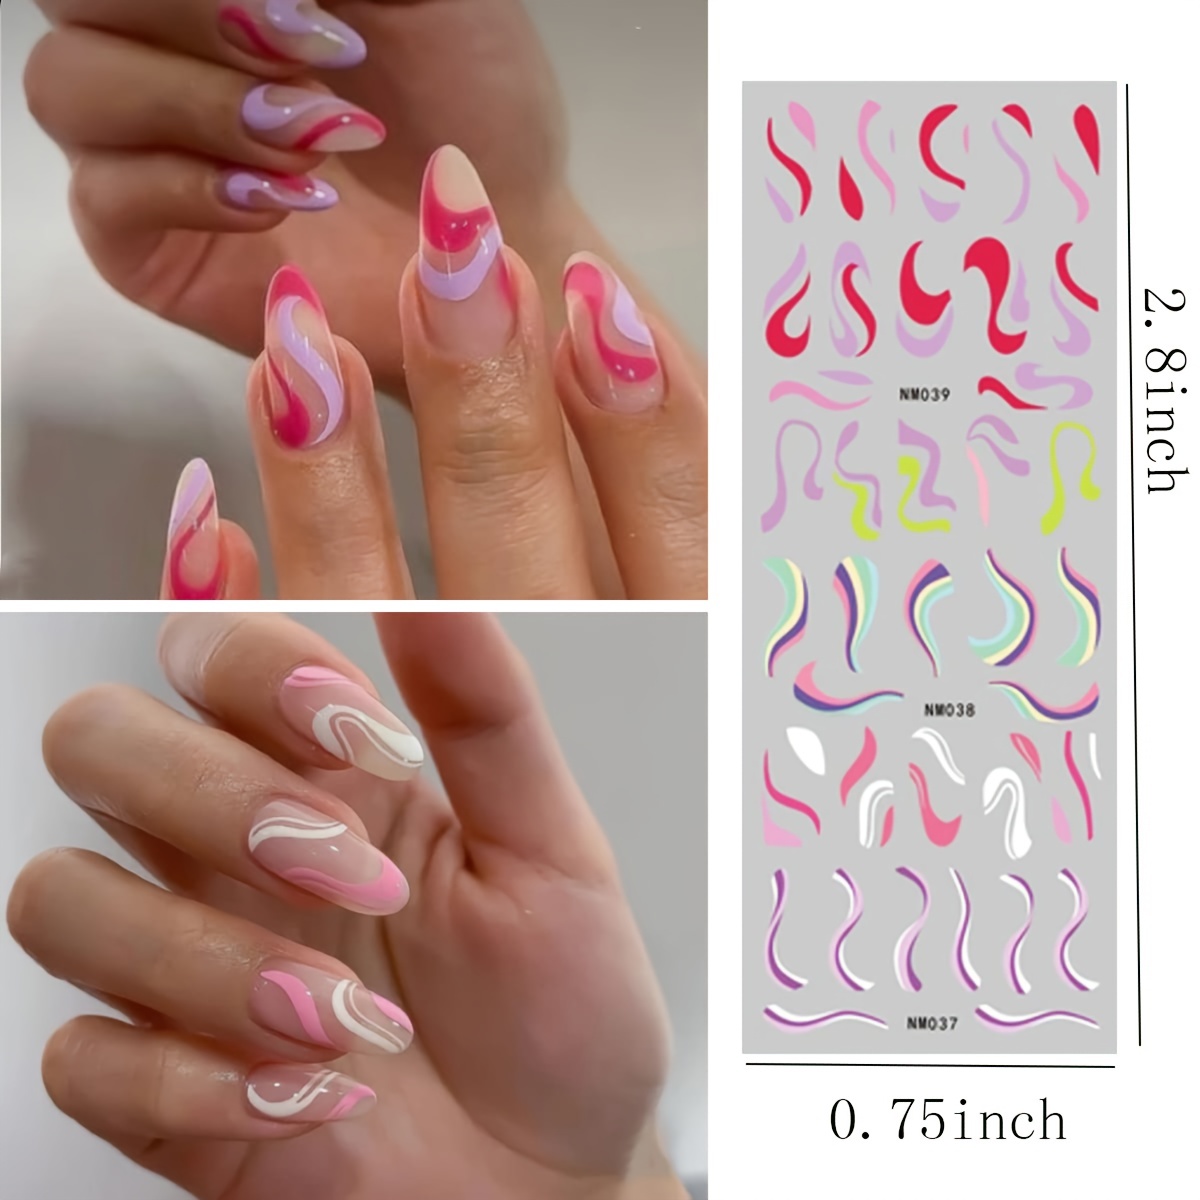 Nail Techniques Beauty Supply